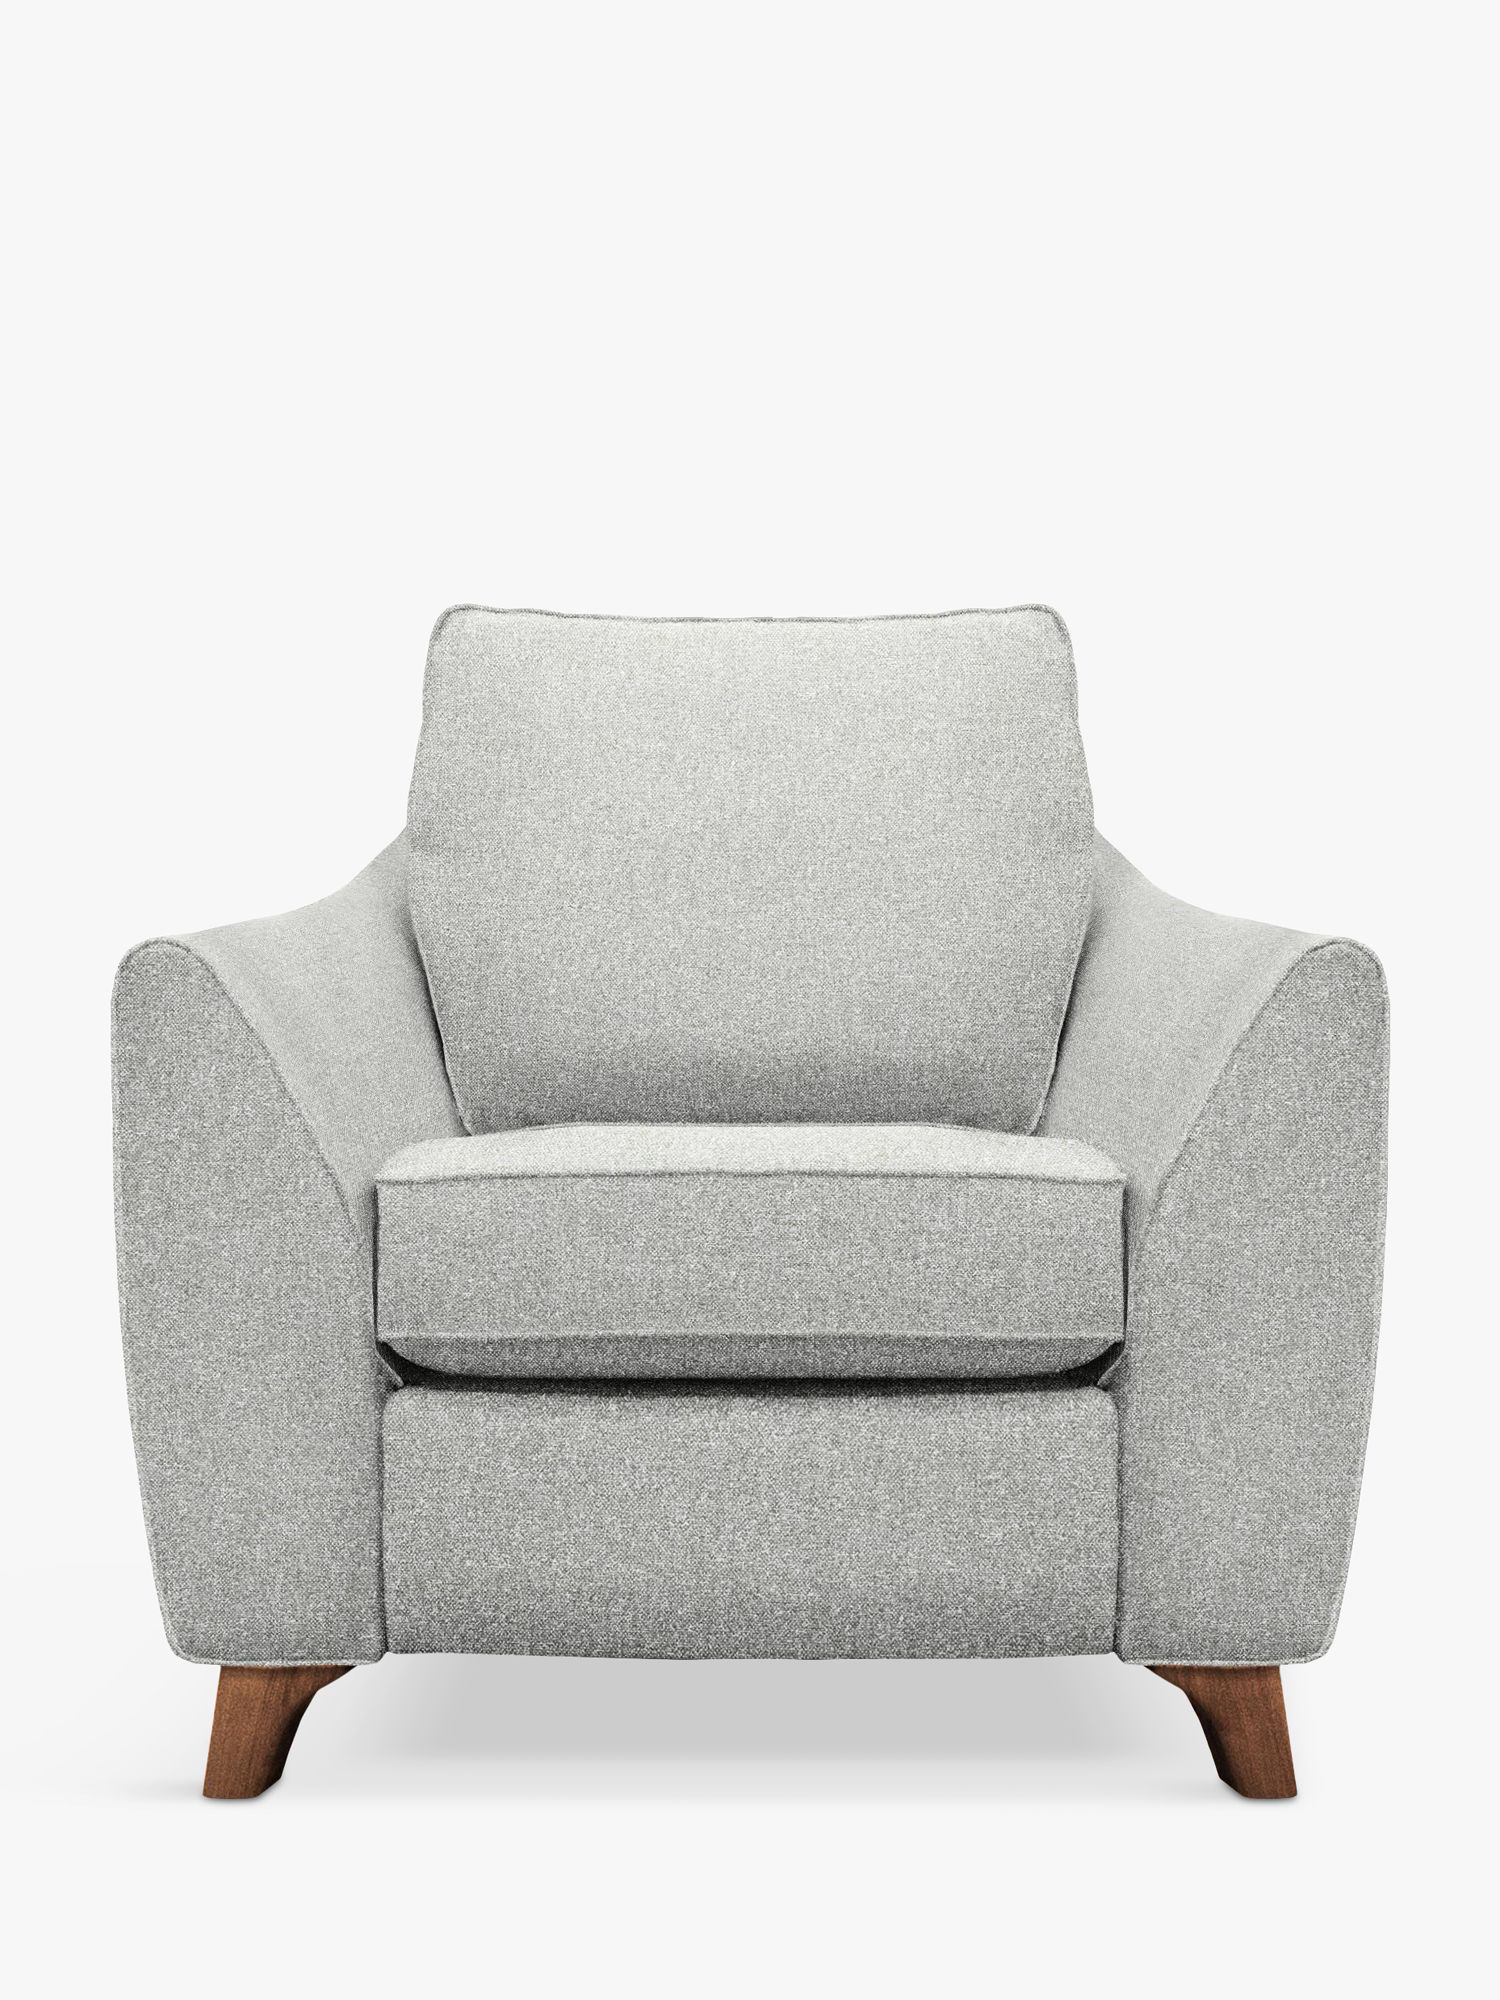 The Sixty Eight Range, G Plan Vintage The Sixty Eight Armchair, Tweed Cloud